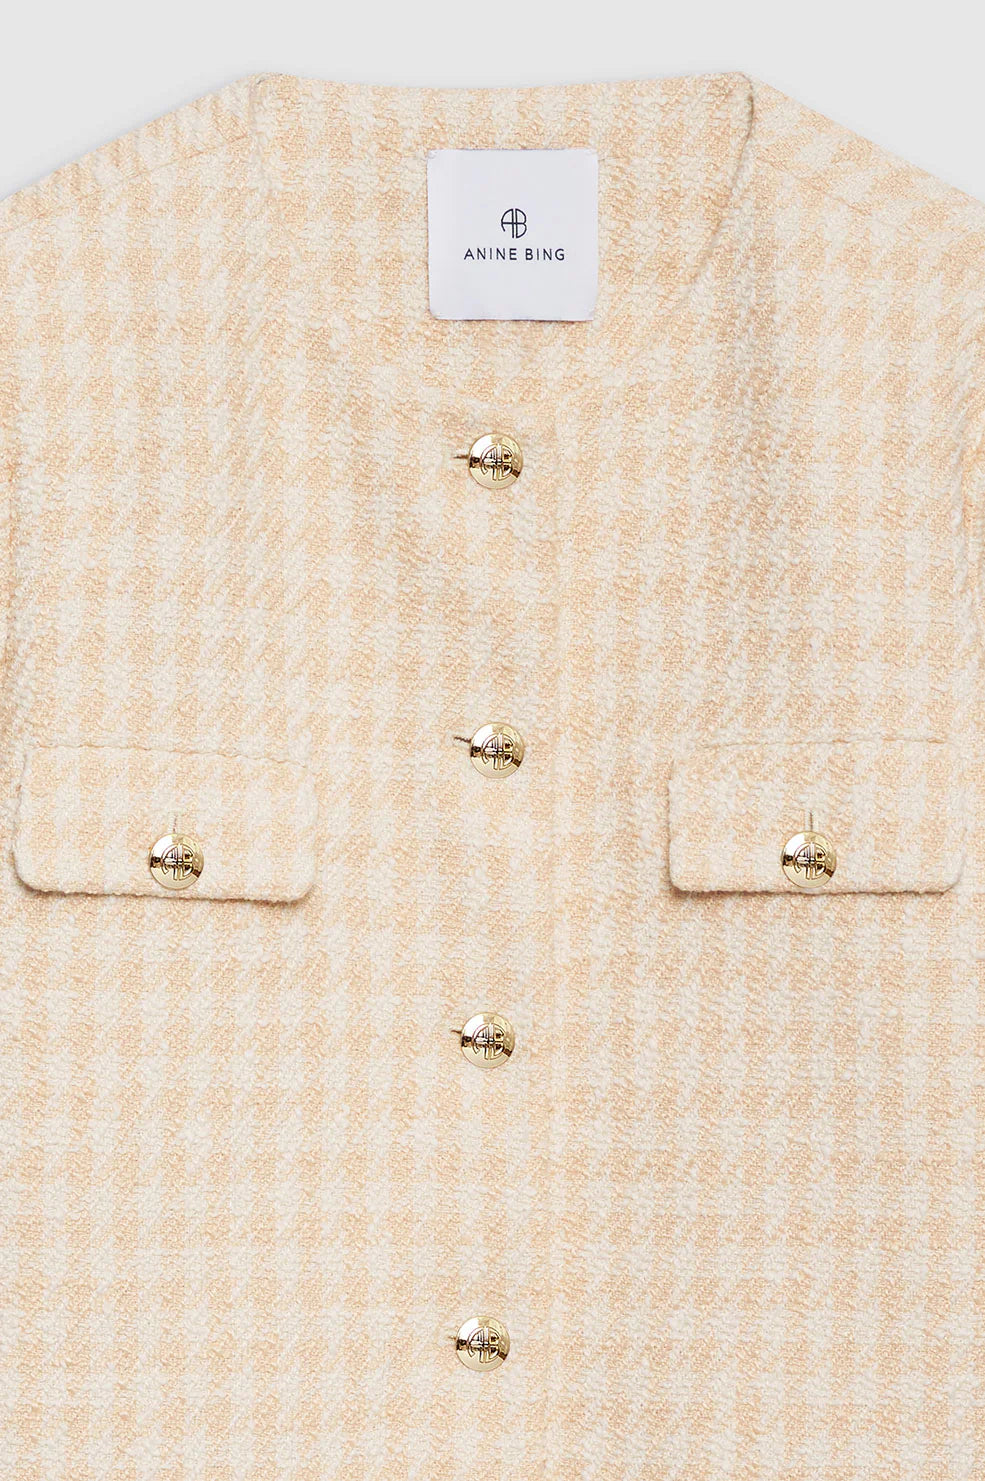 Janet Jacket in Cream and Peach Houndstooth